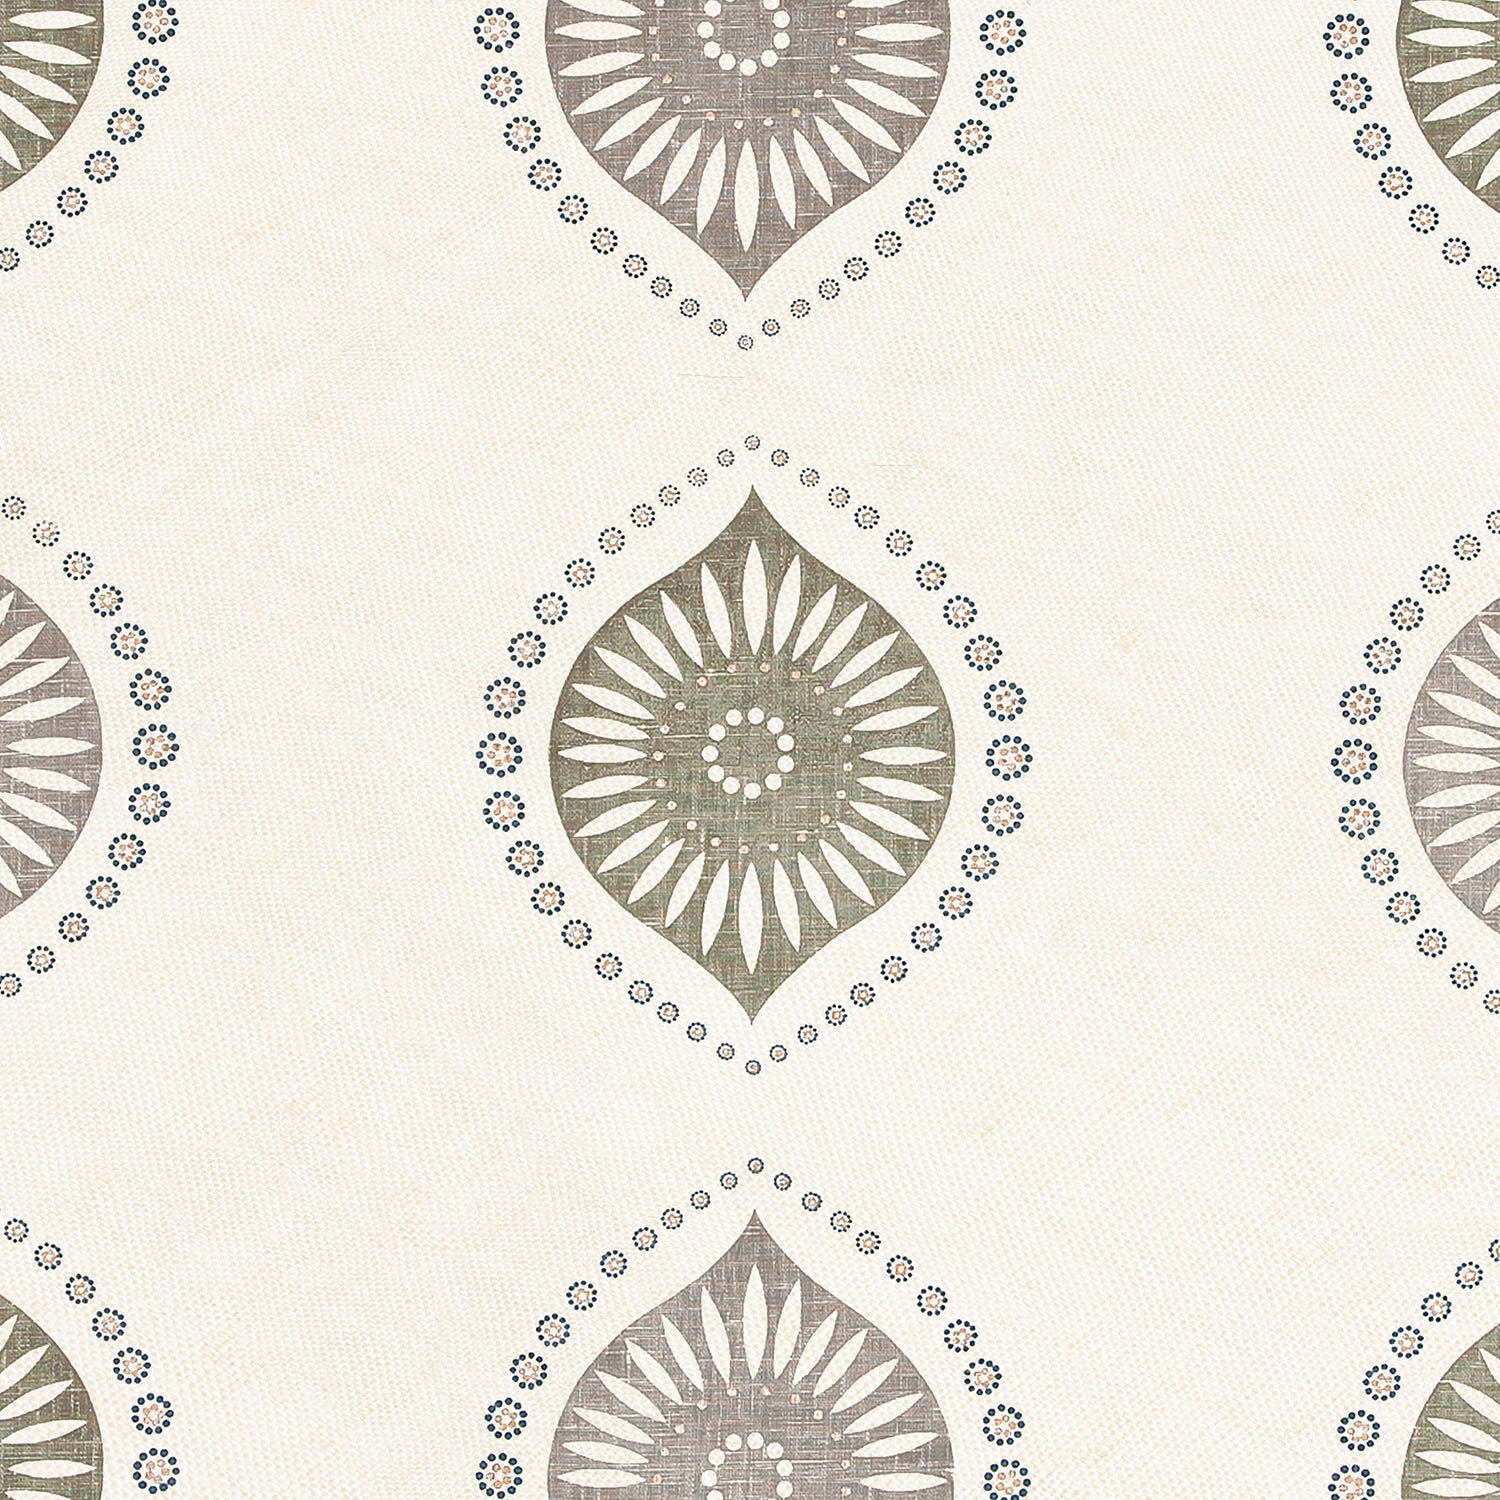 Fabric with a repeating floral print in brown and charcoal on a cream field.